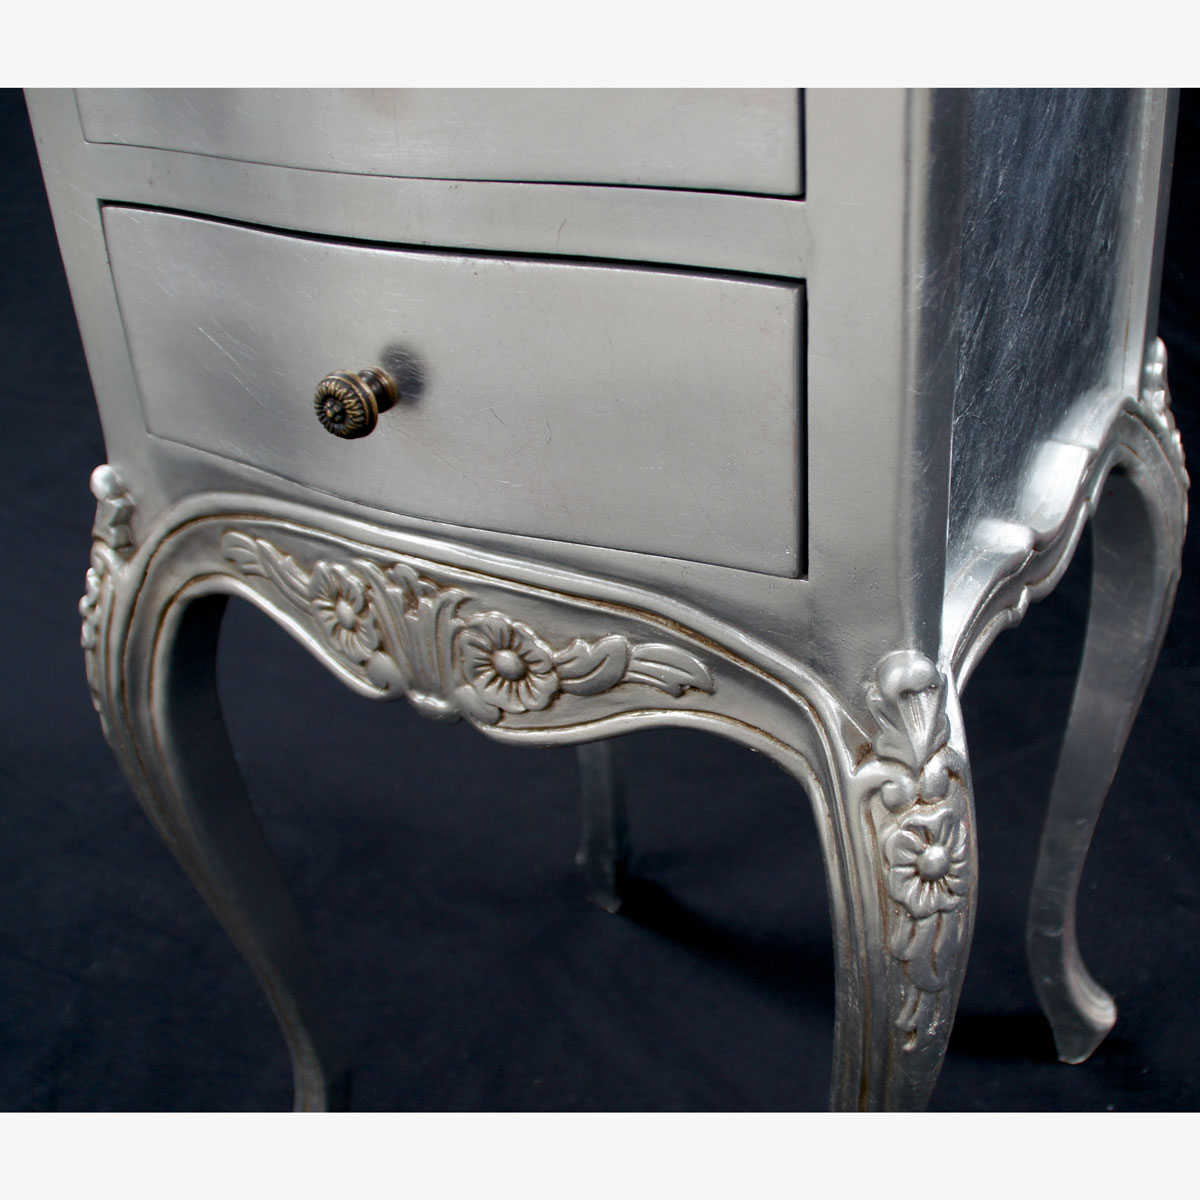 Beautiful Parisian Ornate Two Drawer Lamp Side Table Or Bedside Cabinet Shown In Silver Leaf 3 - Hampshire Barn Interiors - Beautiful Parisian Ornate Two Drawer Lamp Side Table Or Bedside Cabinet Shown In Silver Leaf -